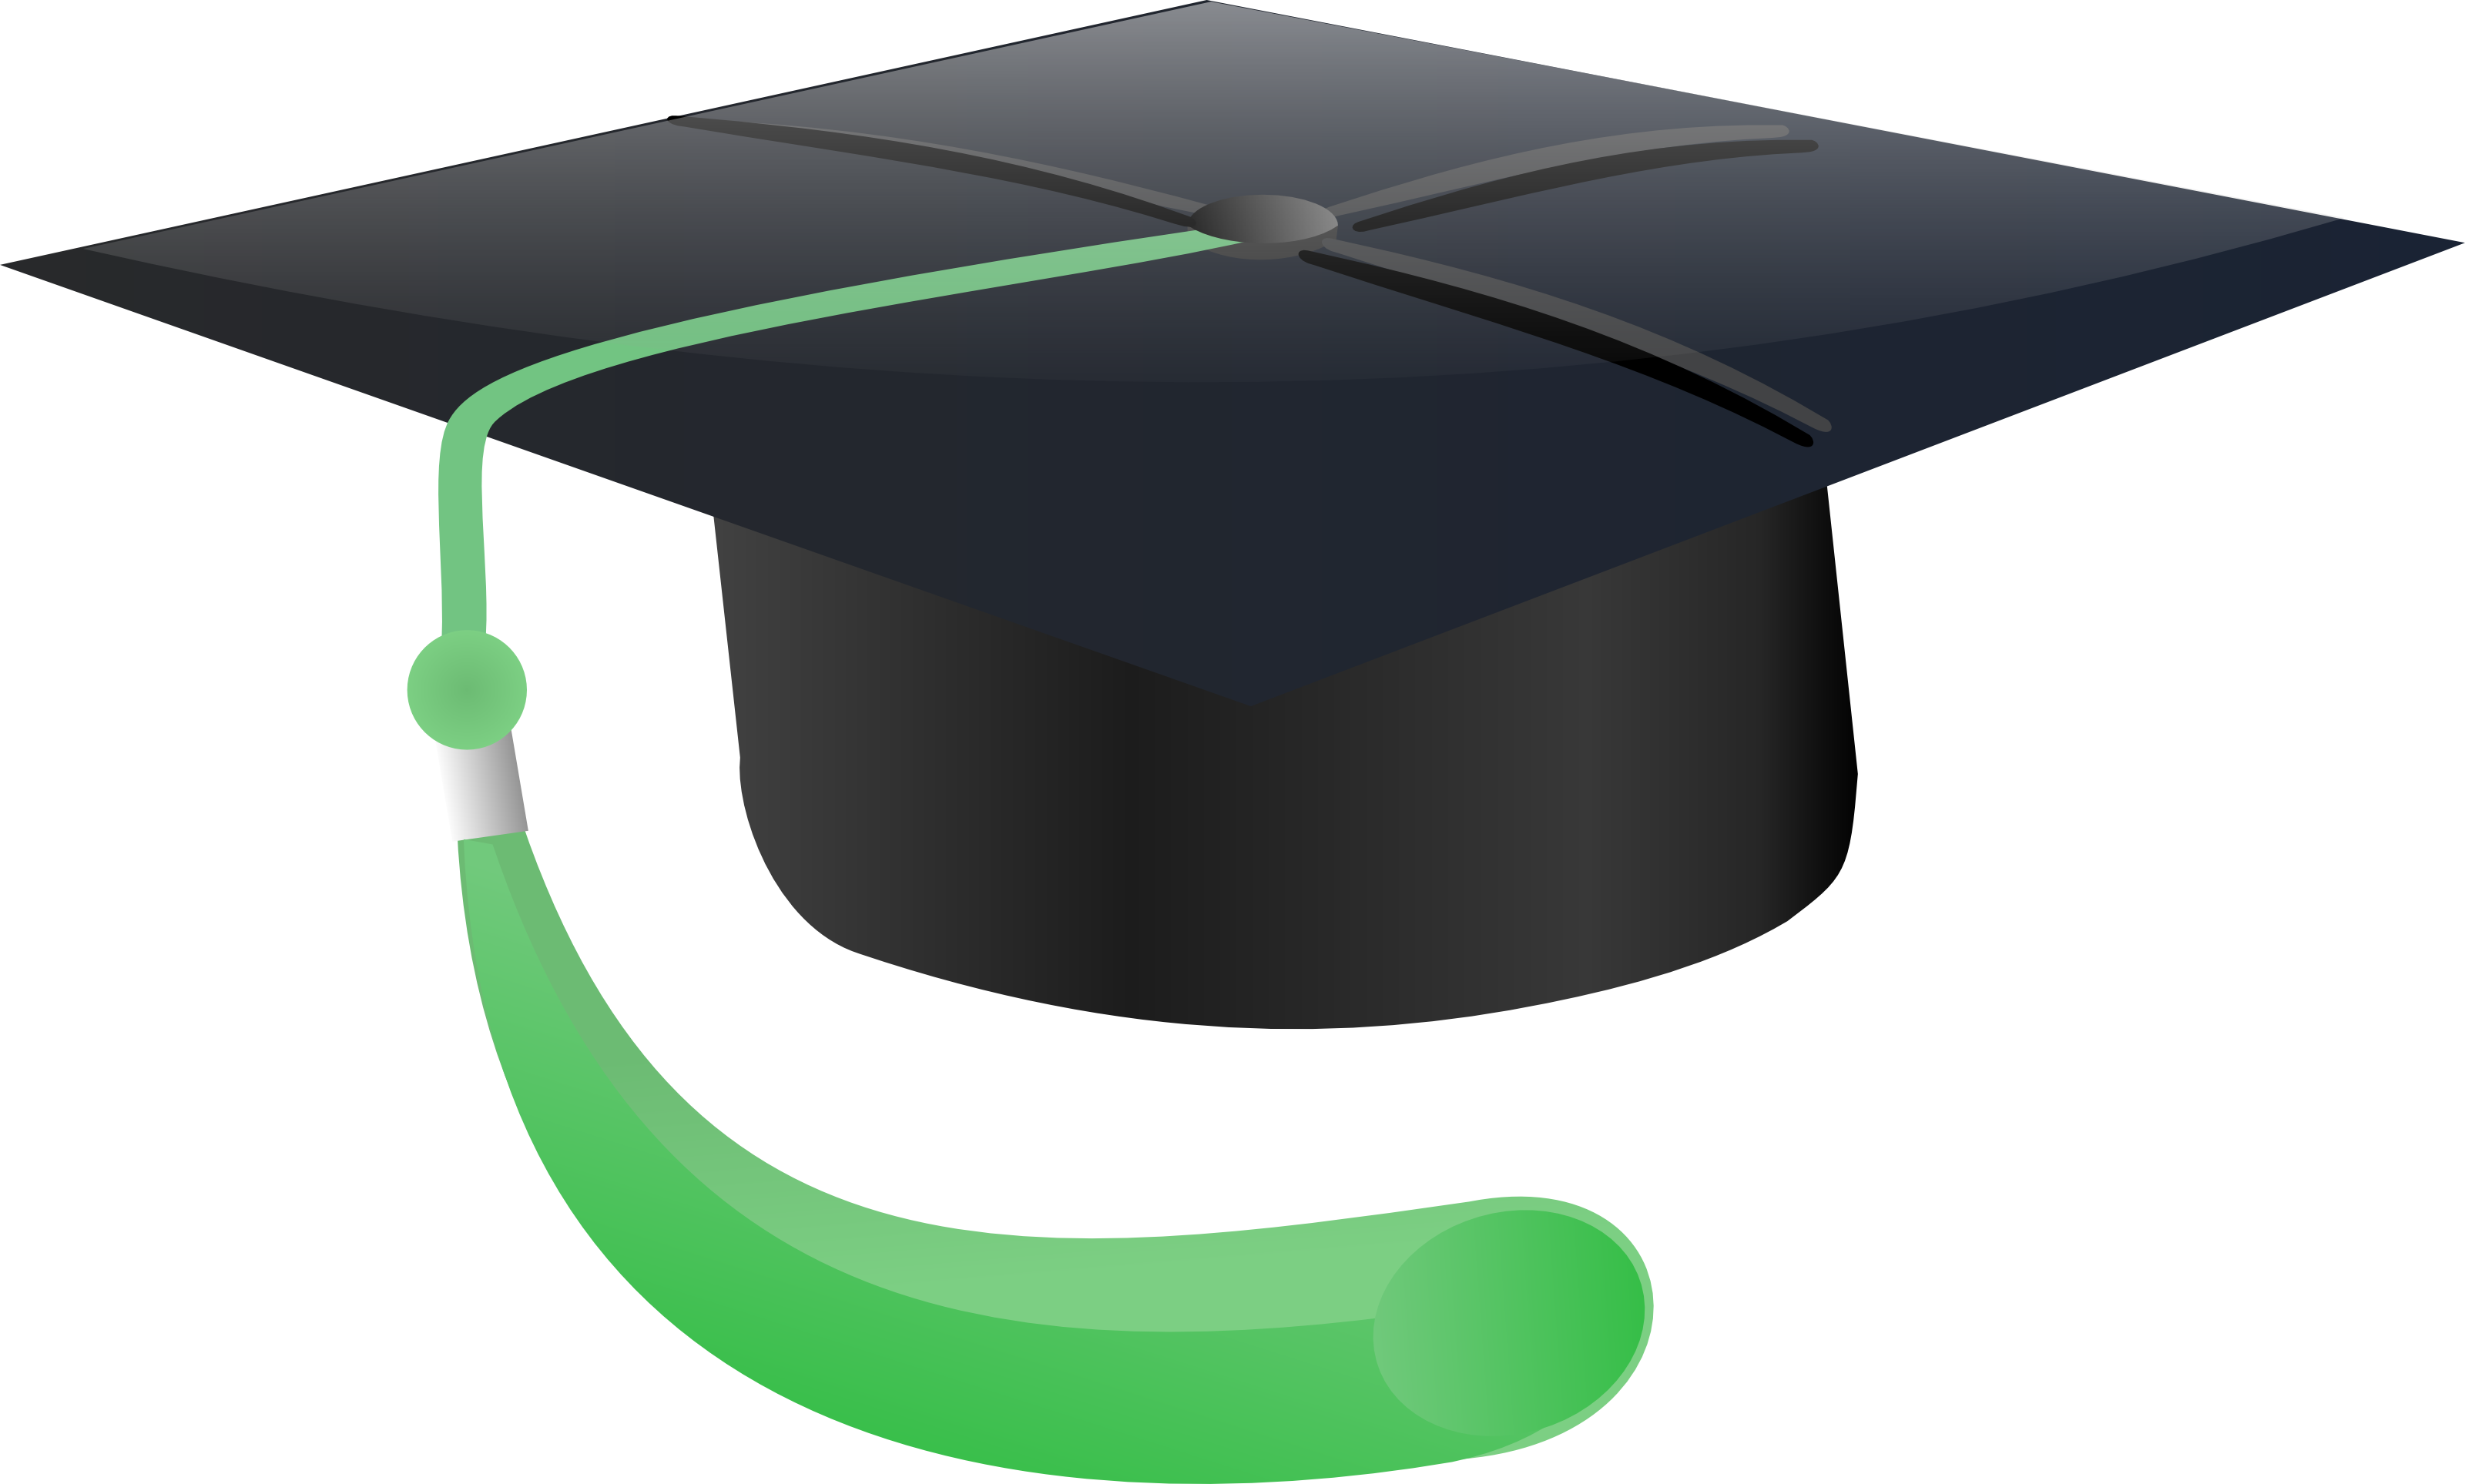 Cap And Gown Clipart The .